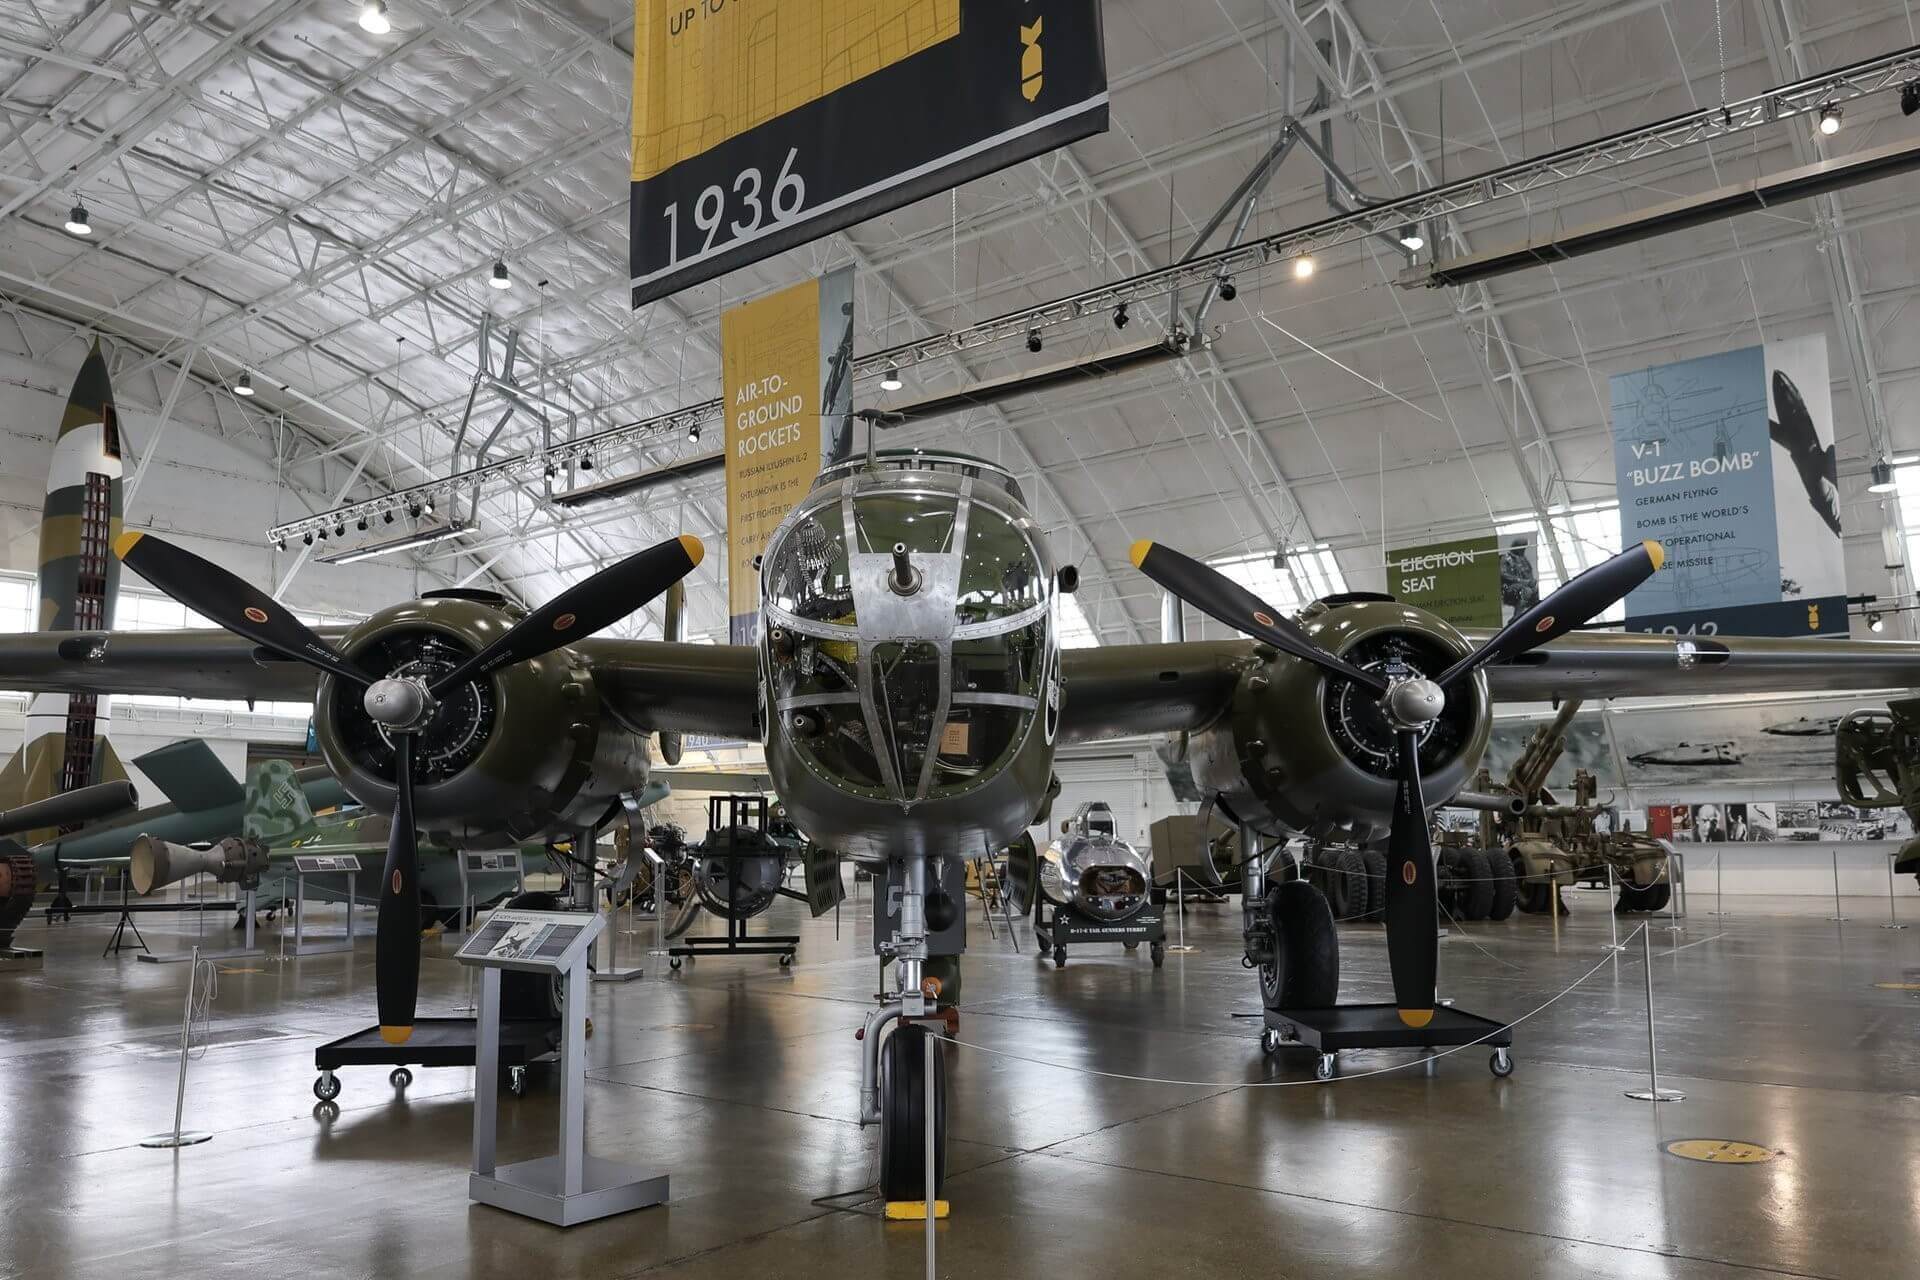 A vintage aircraft from 1936 is seen at the Flying Heritage and Combat Armor Museum in Everett